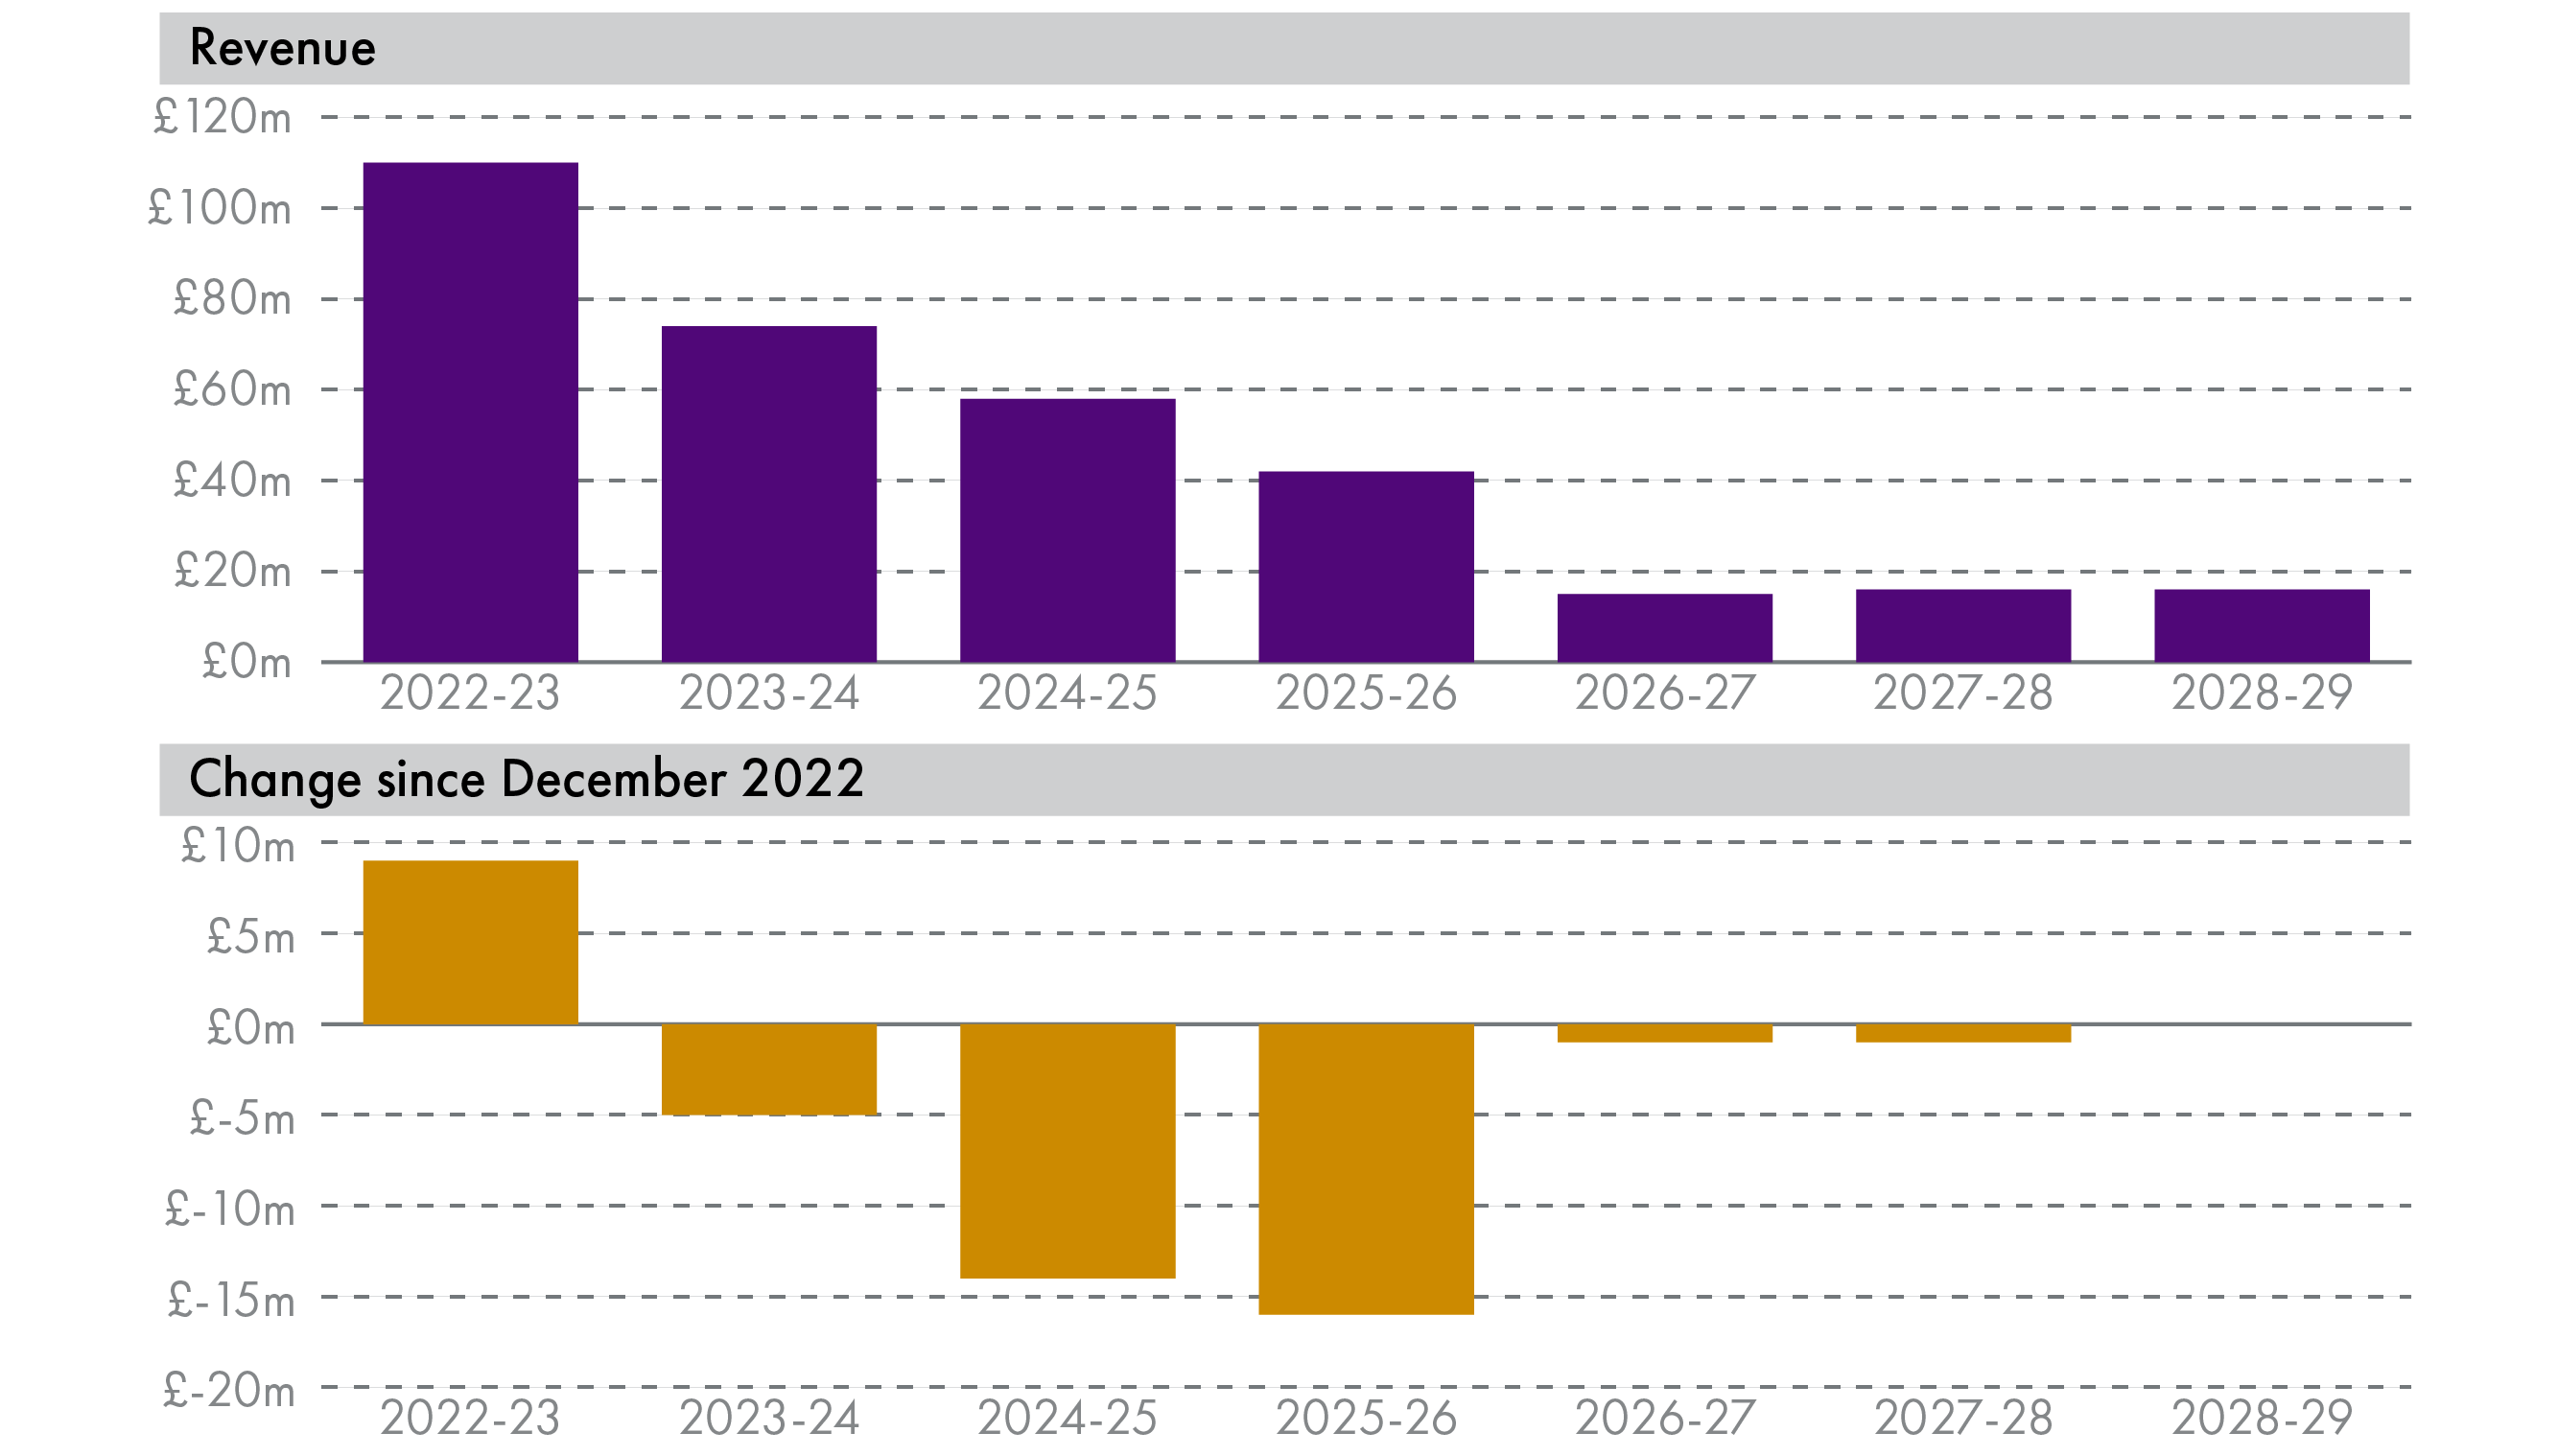 The Scottish Landfill Tax forecast shows a material reduction in revenues as it is expected that less waste will be sent to landfill in order to meet climate goals. By 2026-27, this tax is expected to generate less than £20 million annually. Compared to the SFC's December 2022 forecast, income in 2024-25 and 2025-26 is expected to be around £15 million lower.